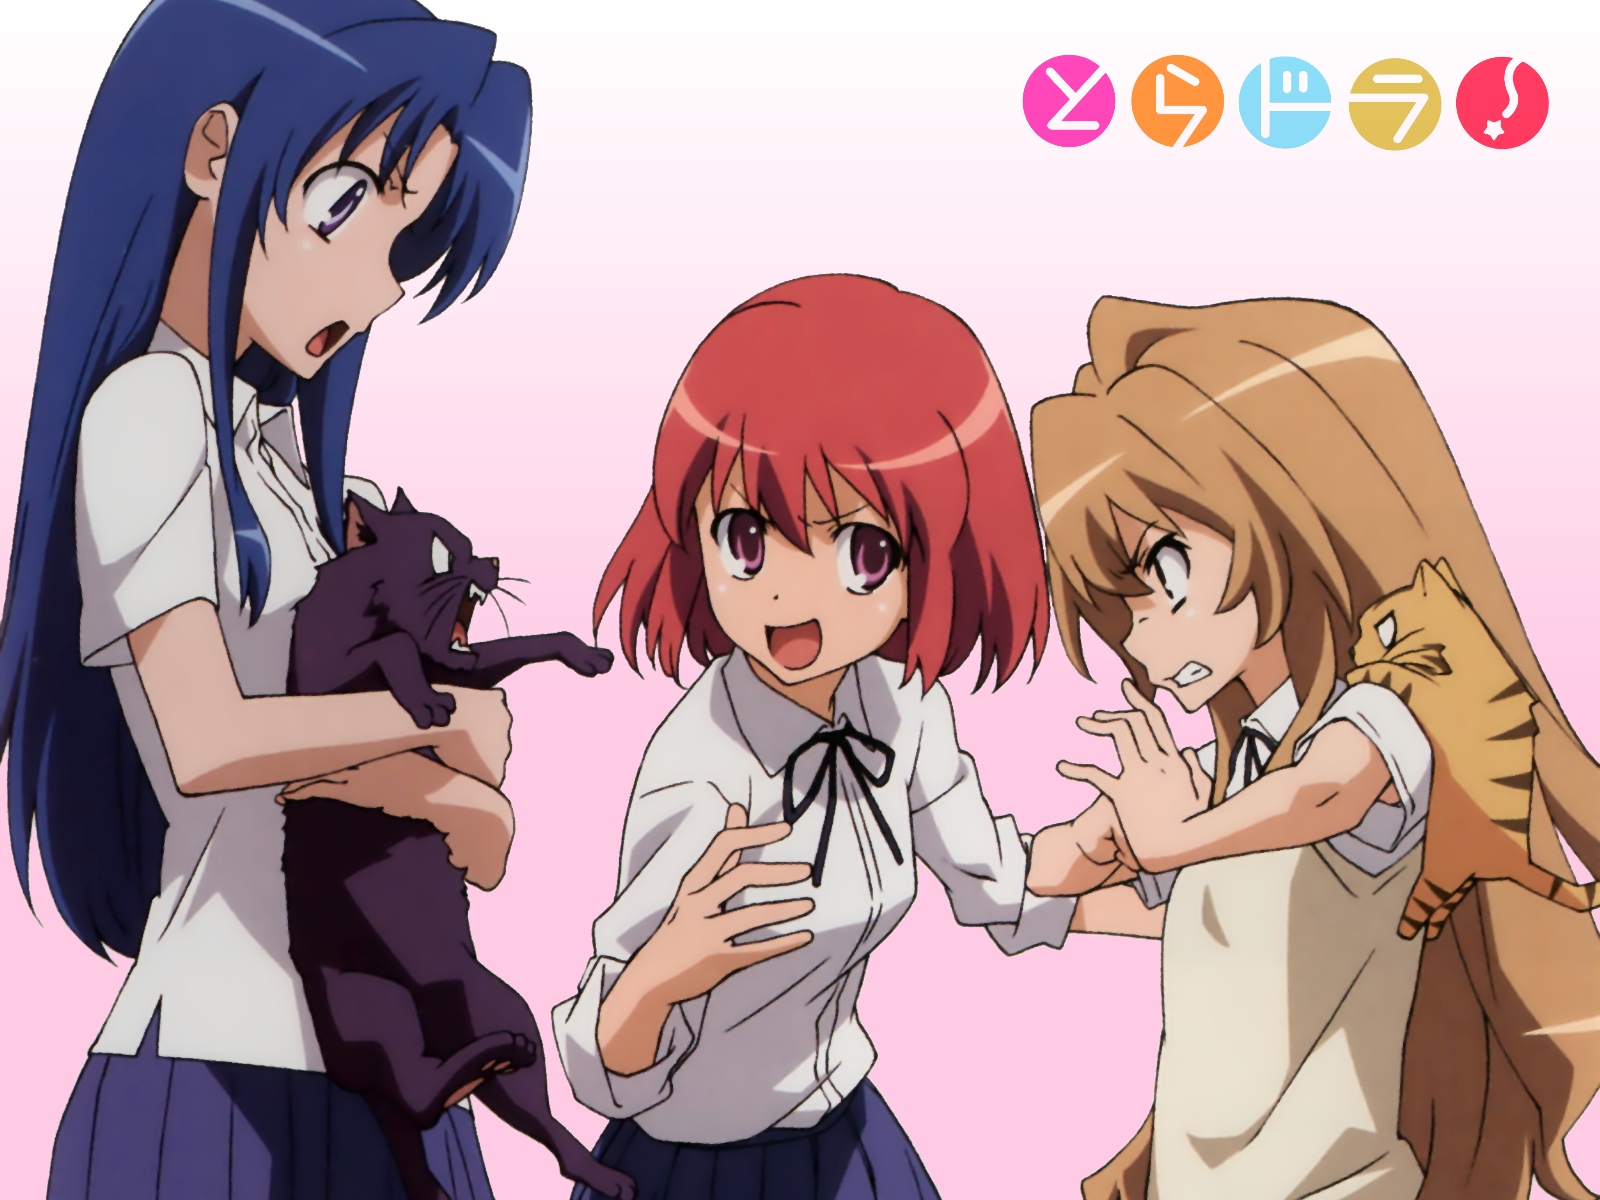 Anime wallpaper featuring Toradora! characters in a captivating scene.